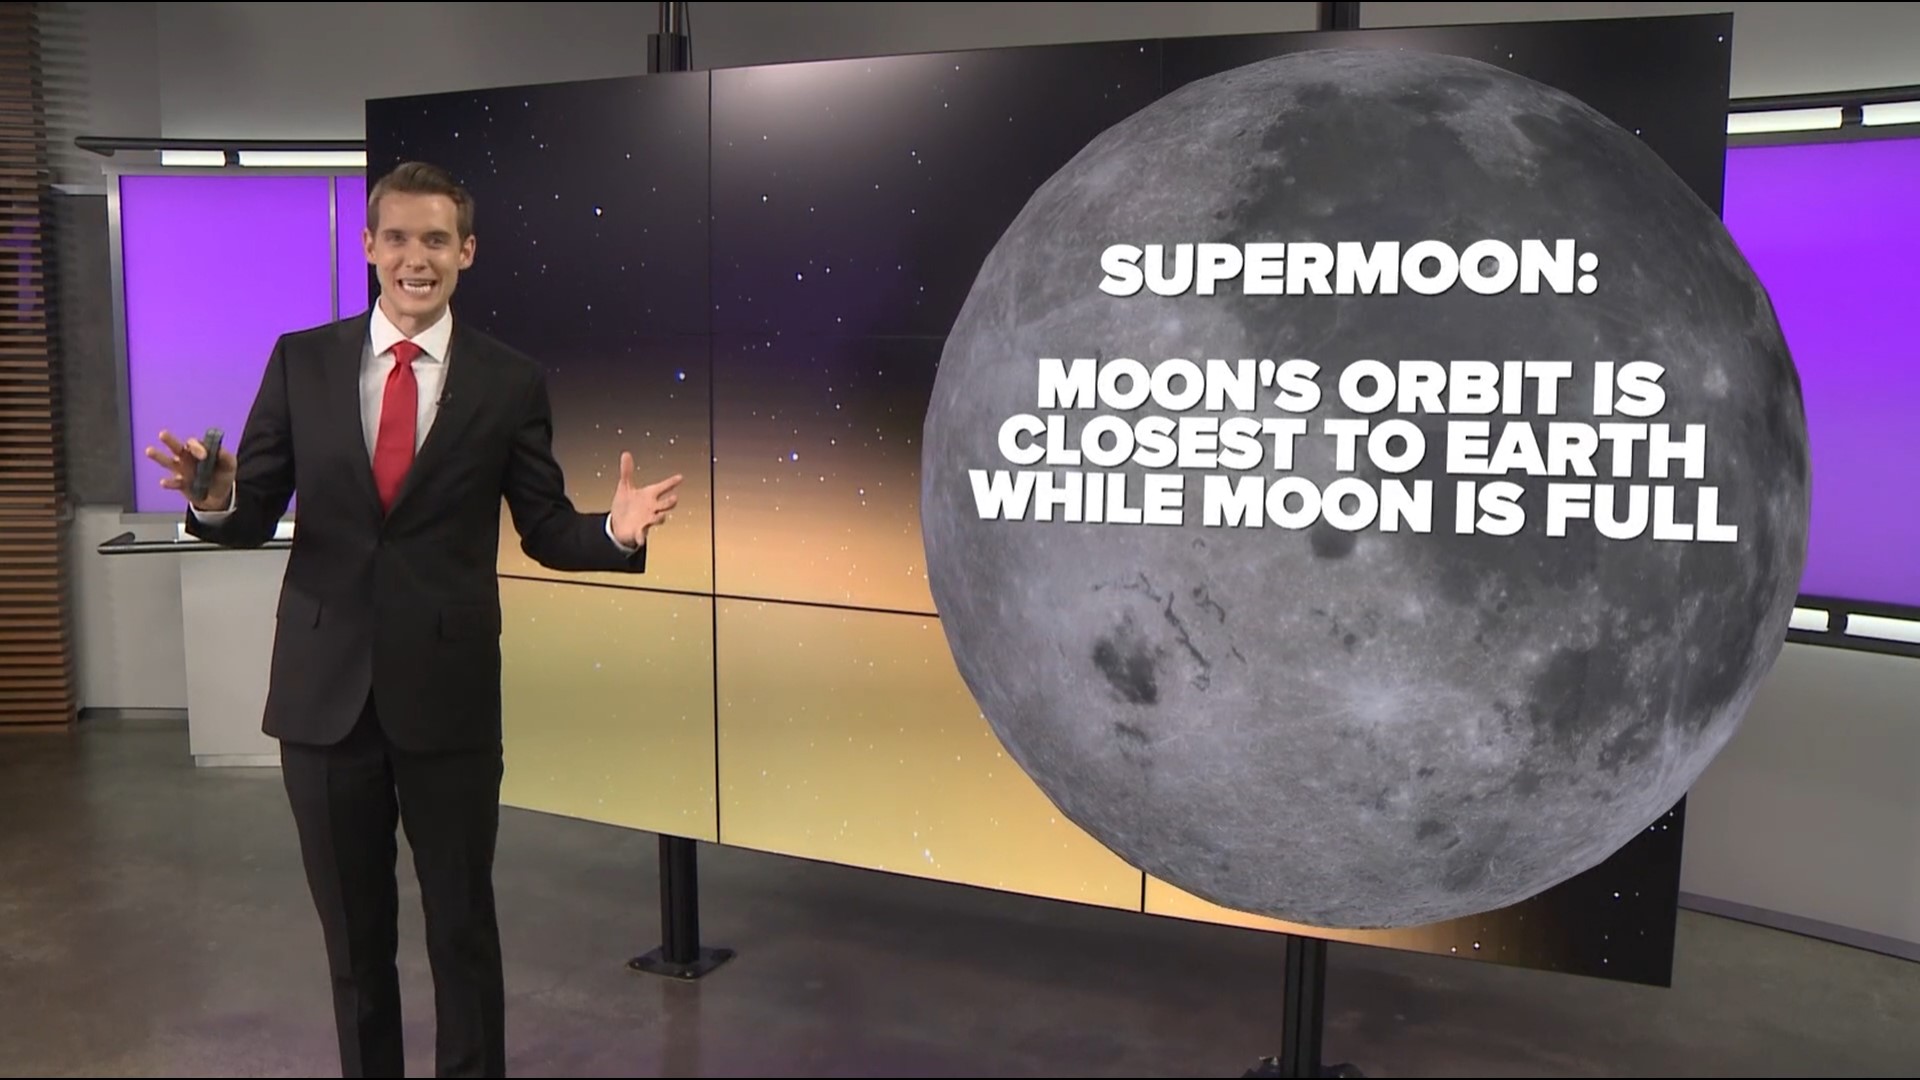 Here's what you'll want to know for this Thursday's full supermoon.